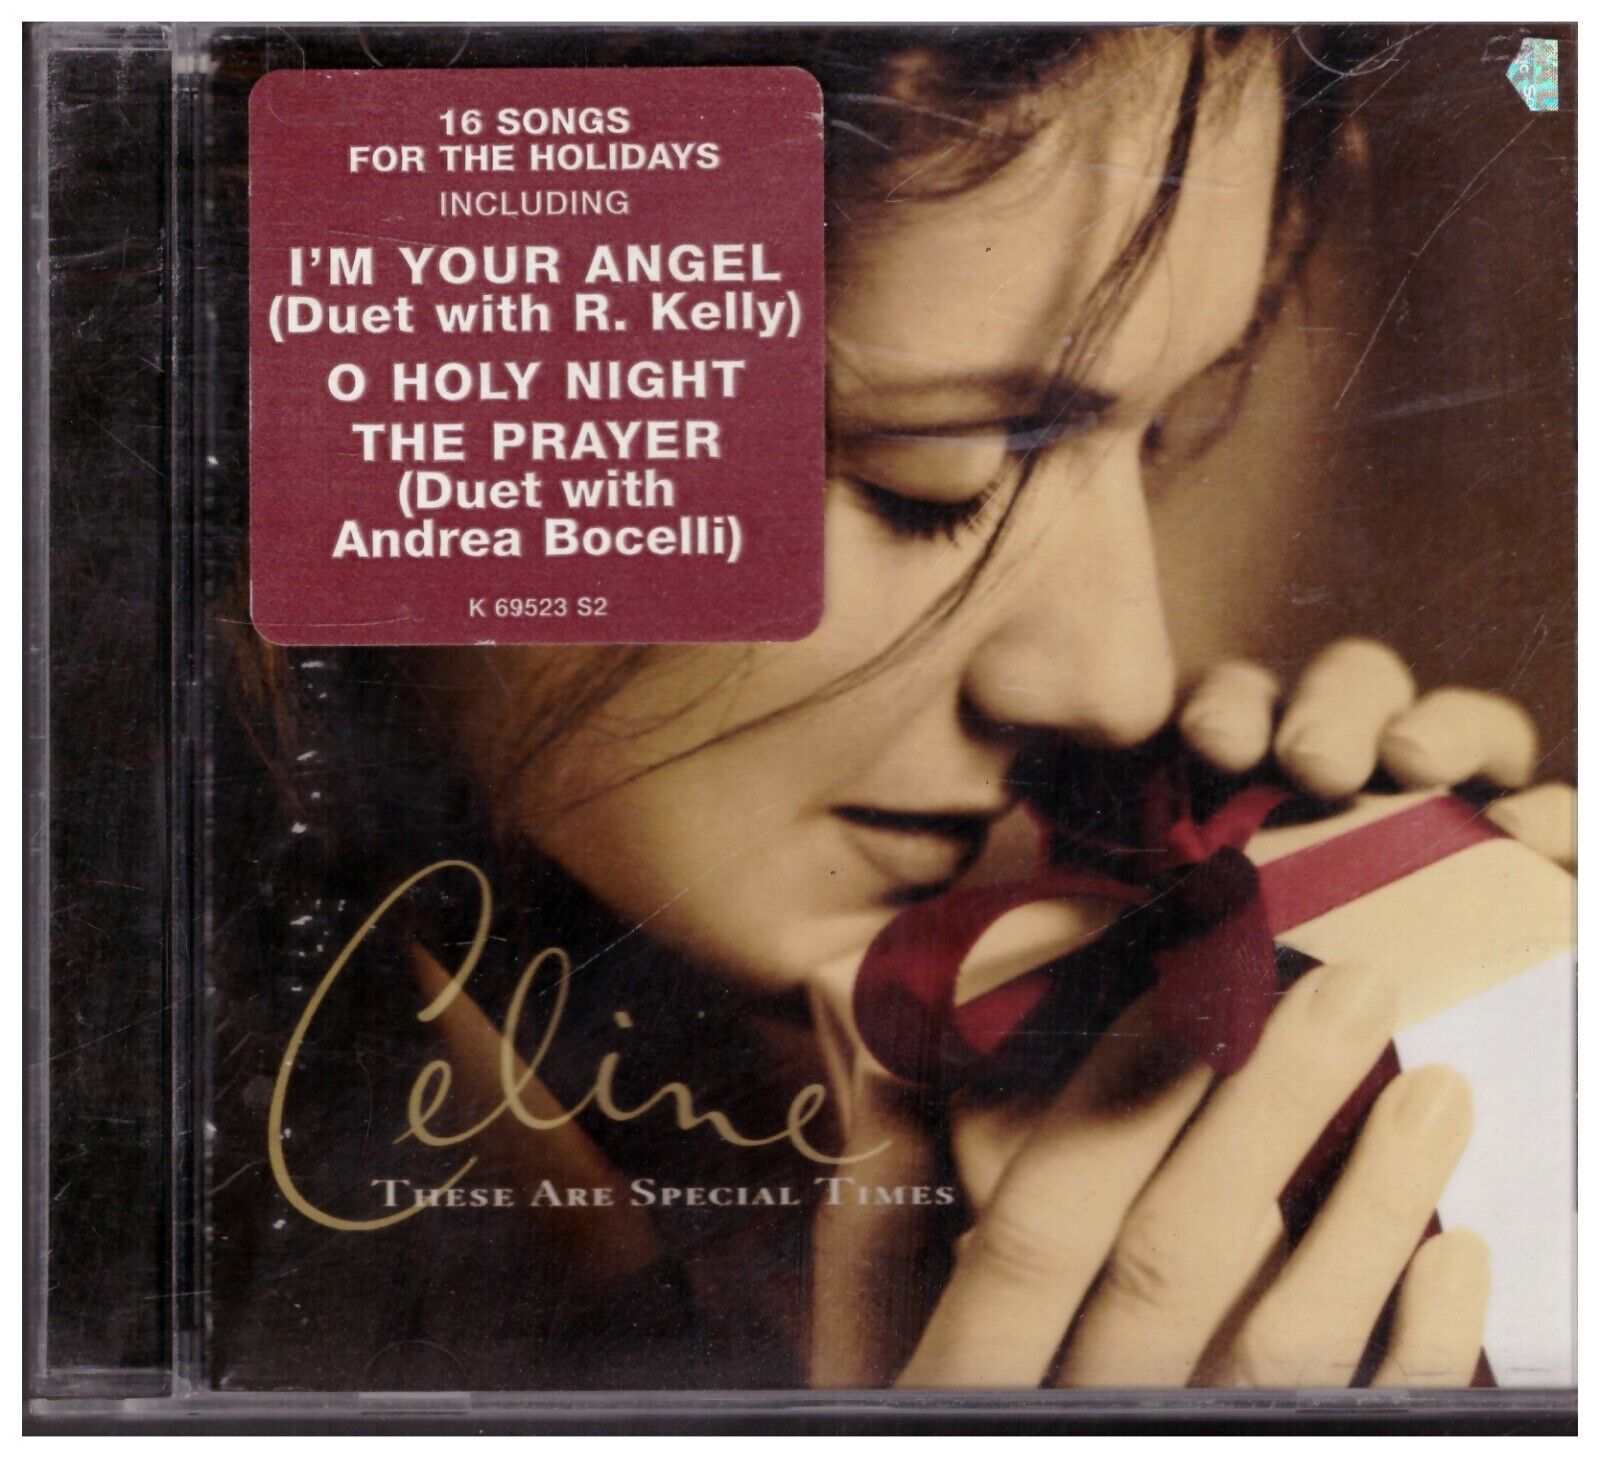 Celine Dion - These are special Times [CD] Epic Records